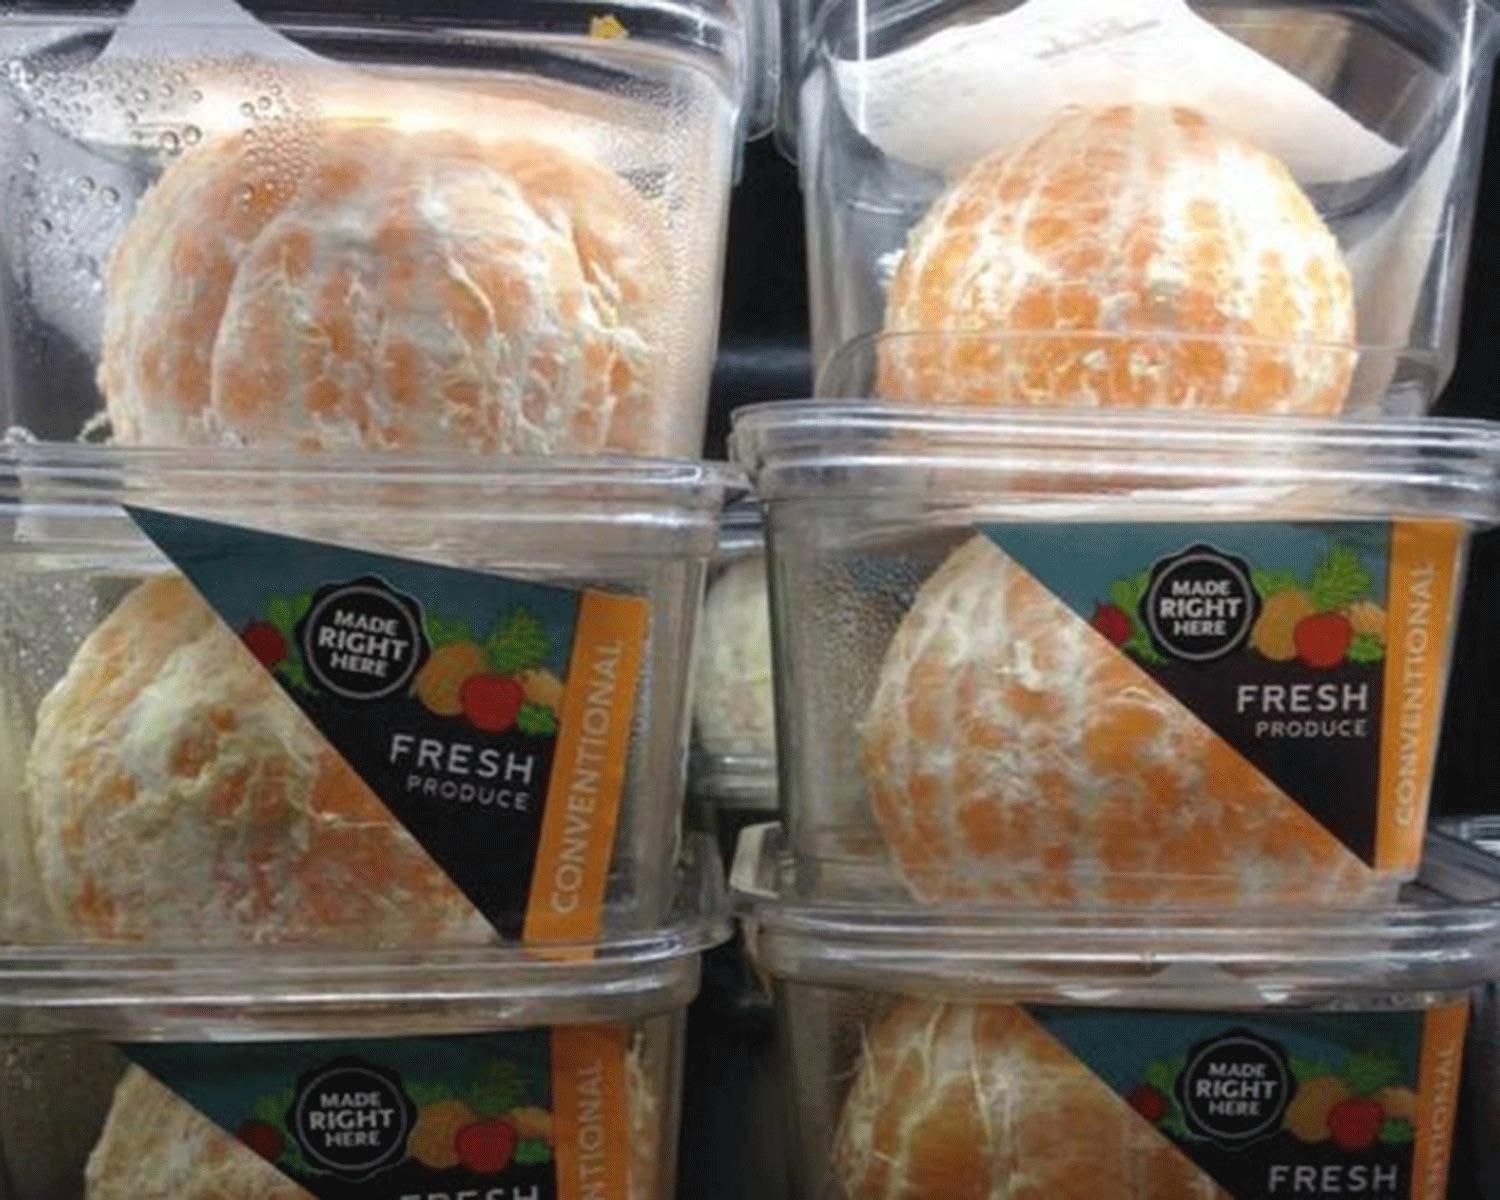 If only nature would find a way to cover these oranges so we didn't need to waste so much plastic